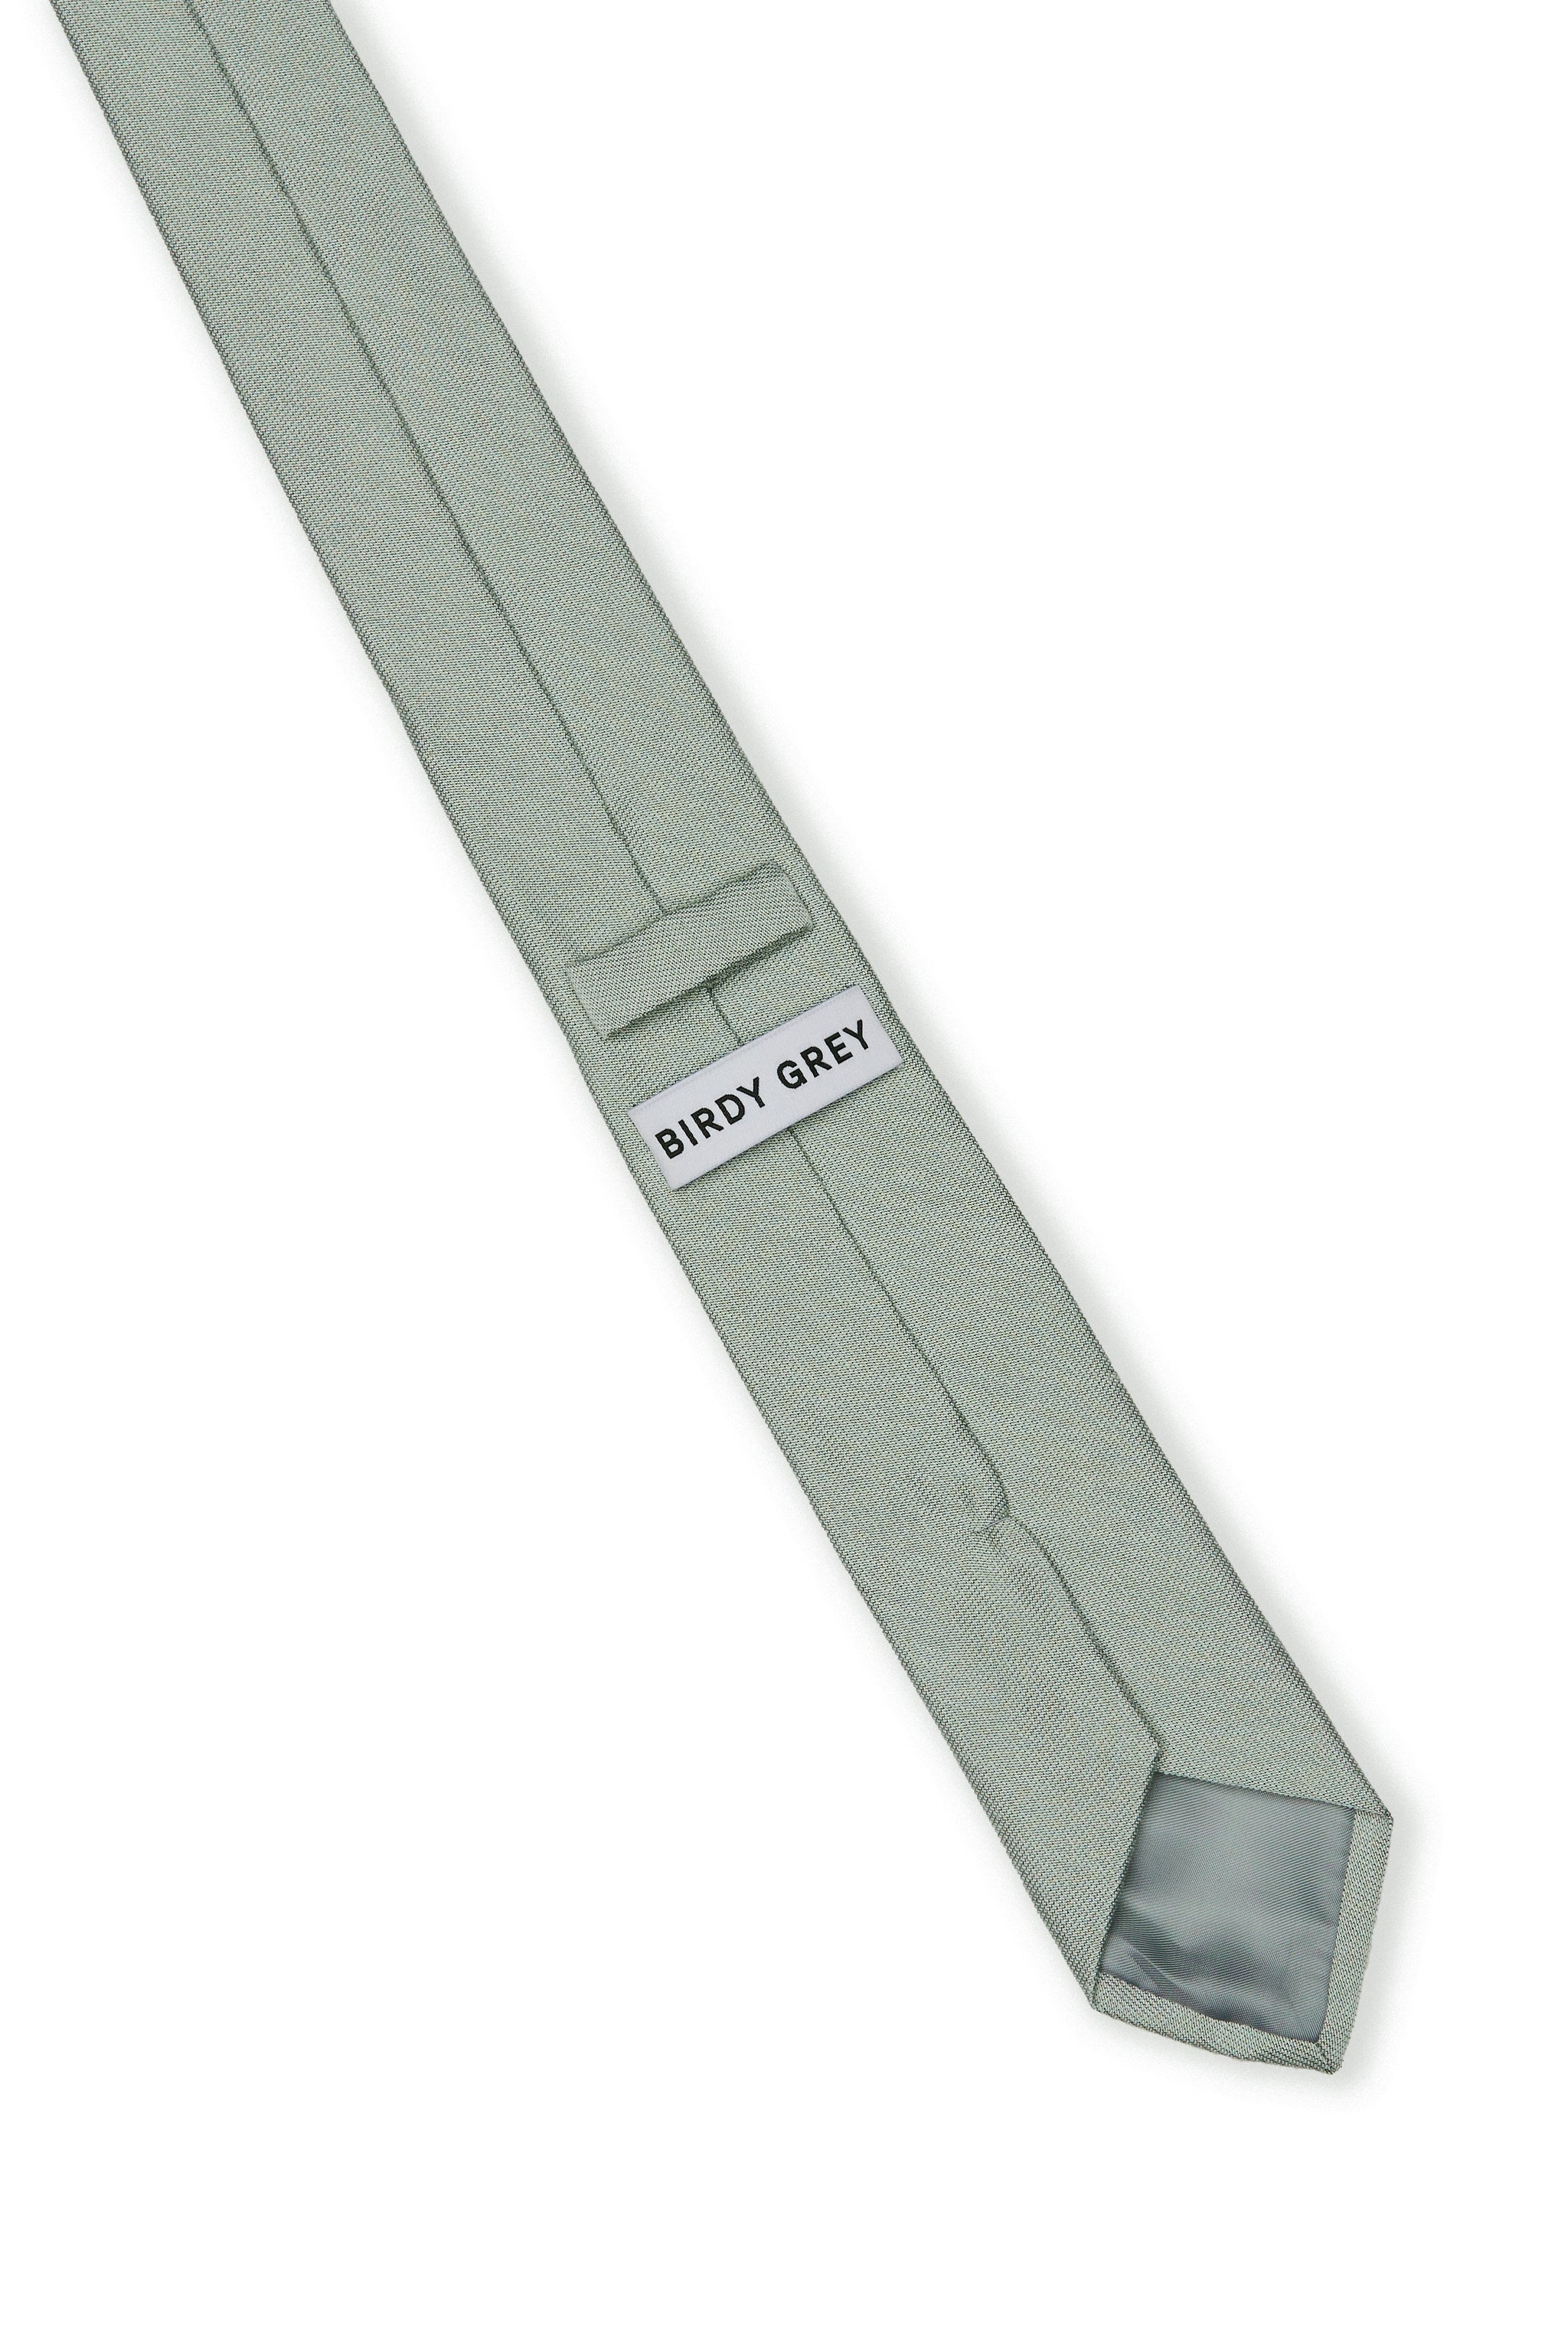 Elevated view of the Simon Necktie in sage fully extended on a white background showing the back of the necktie with grey satin lining, a keeper loop to tuck the necktie end, and a label that reads, 